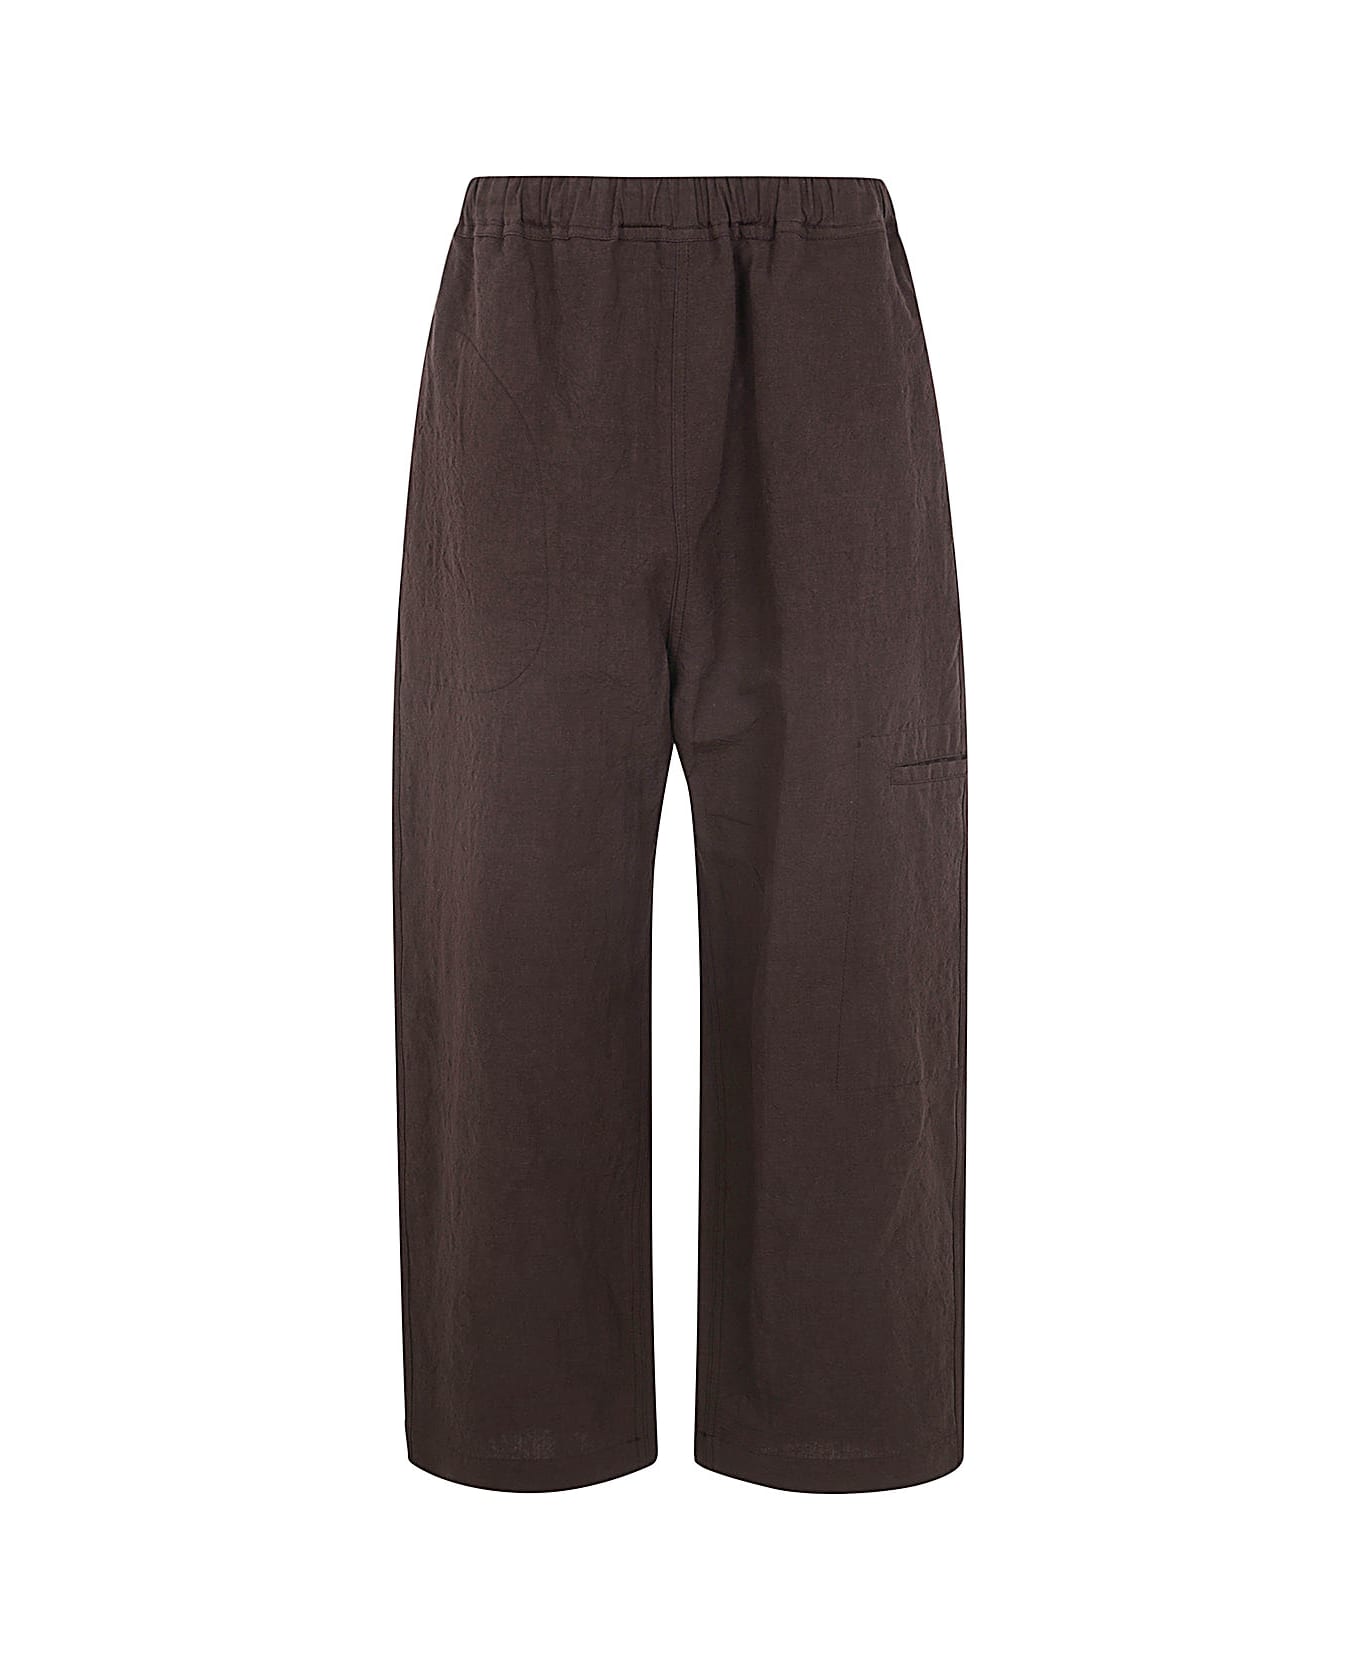 Sofie d'Hoore Wide Pants With Elastic Waist - Cacao ボトムス